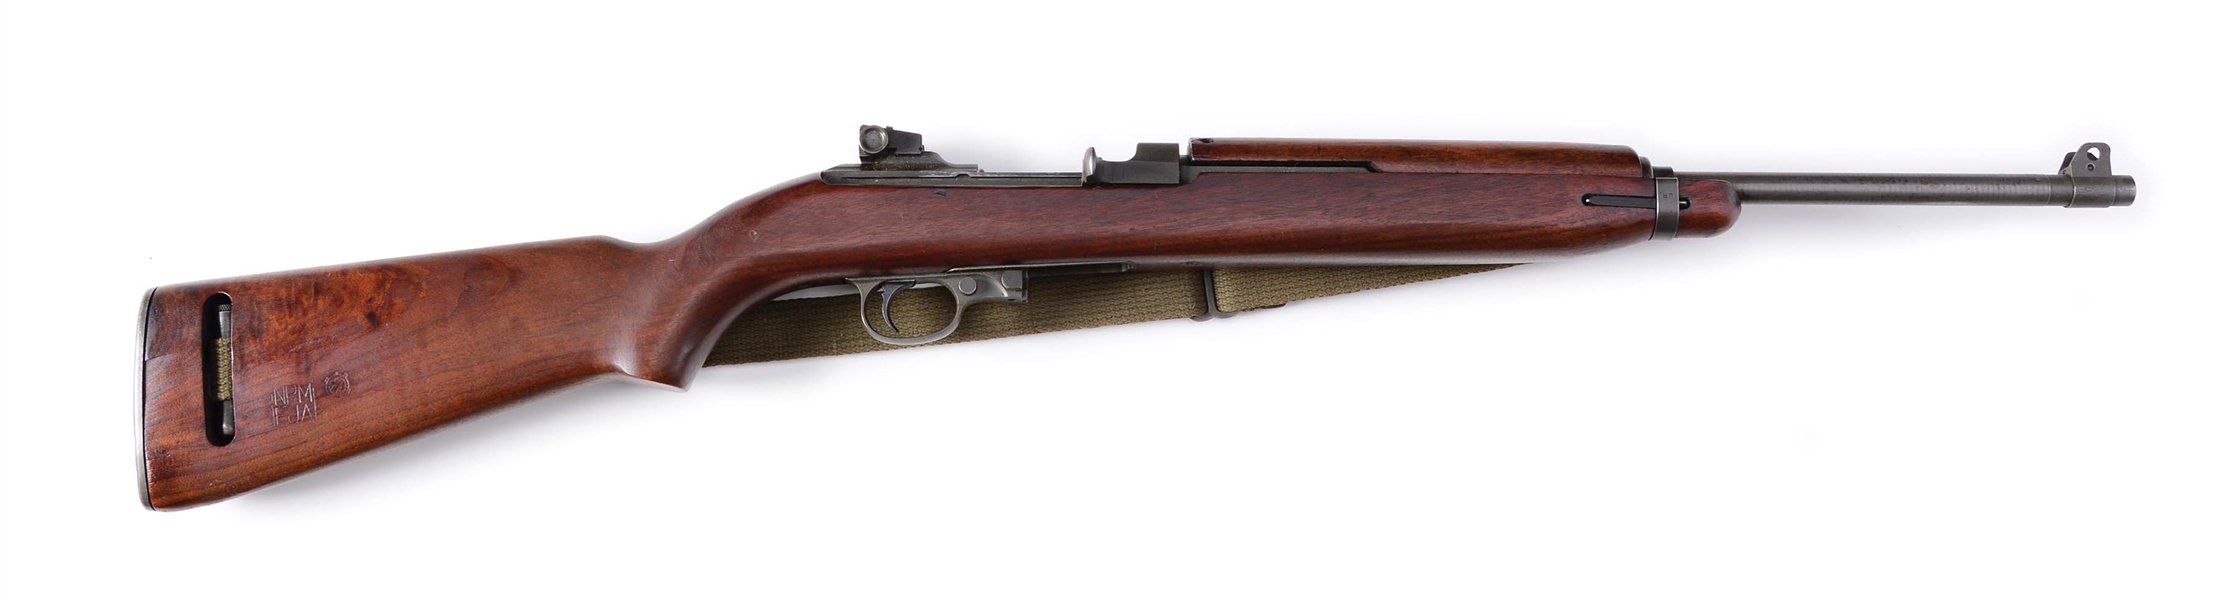 (C) FINE AND DESIREABLE  NATIONAL POSTAL METER M1 CARBINE WITH ORIGINAL SLING AND OILER.